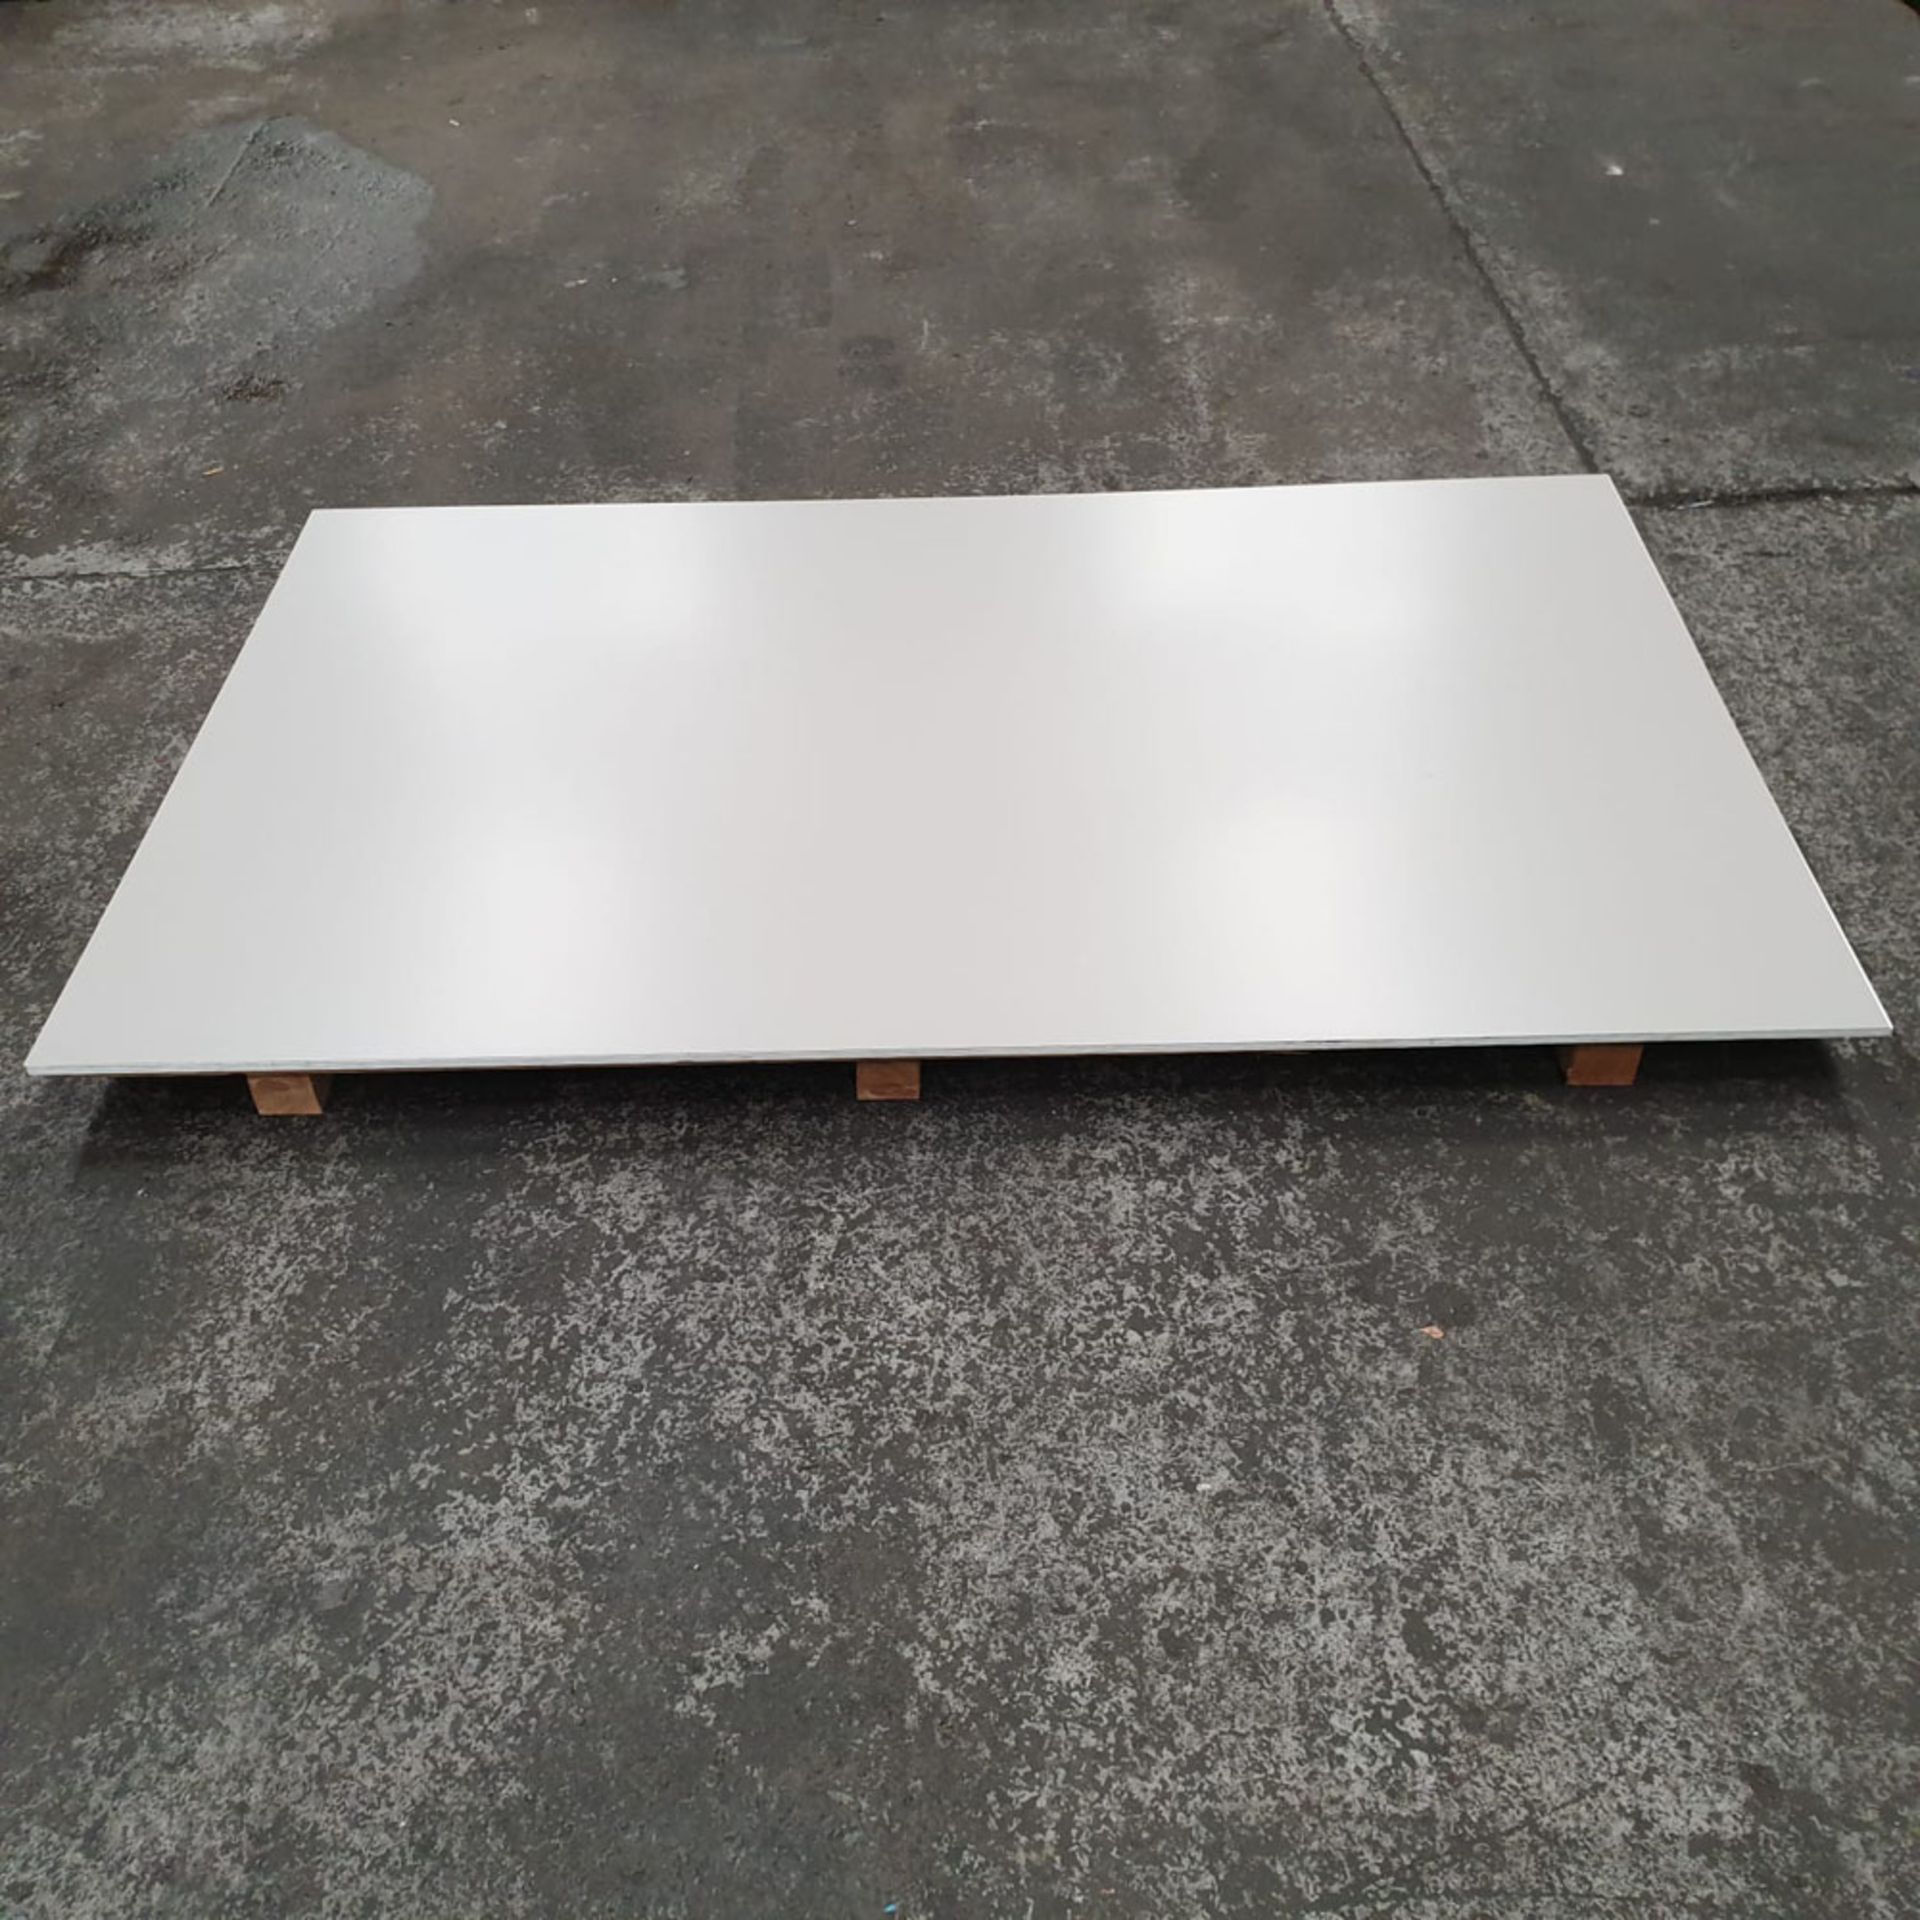 14 X Colorcoat HPS200 Ultra. Approx 2000mm x 1250mm x 0.75mm Thickness. - Image 4 of 5